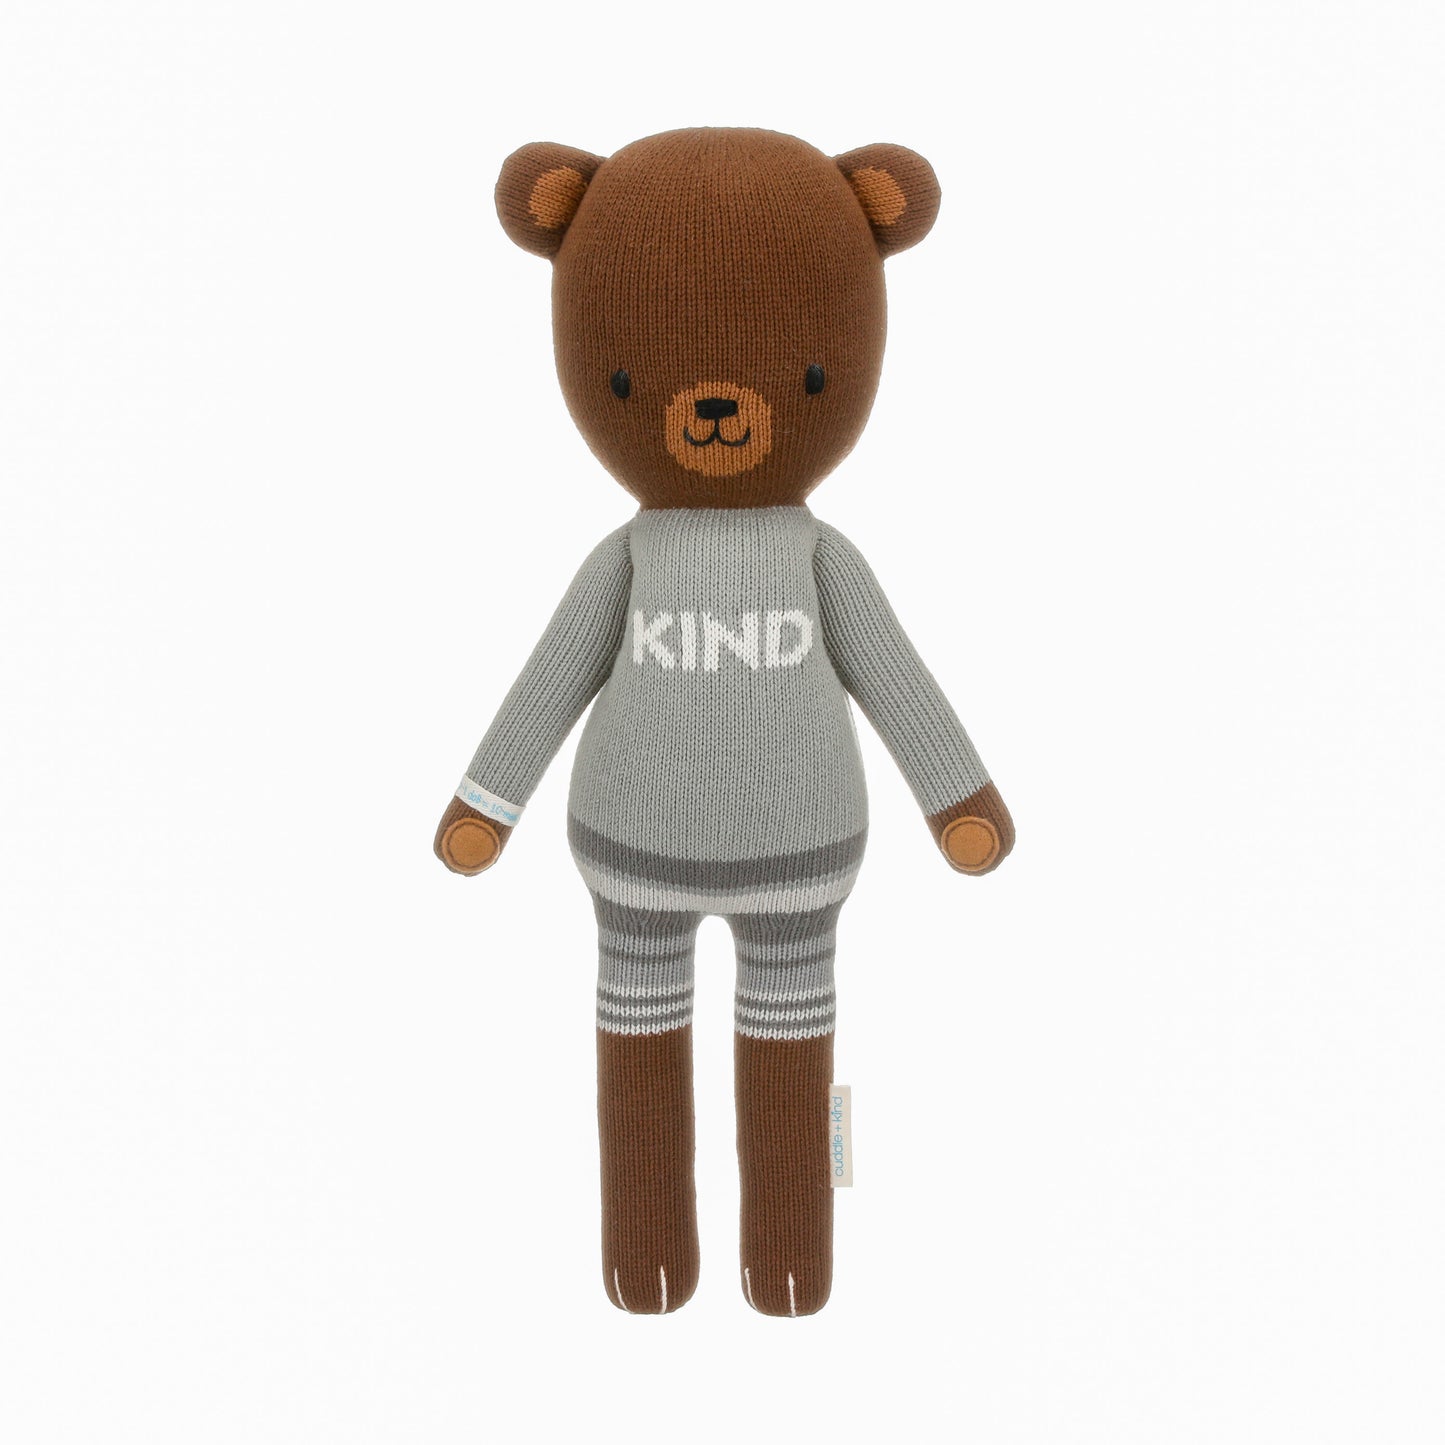 Oliver the bear shown from 360°. Oliver has grey shorts and a sweater that says “Kind.”